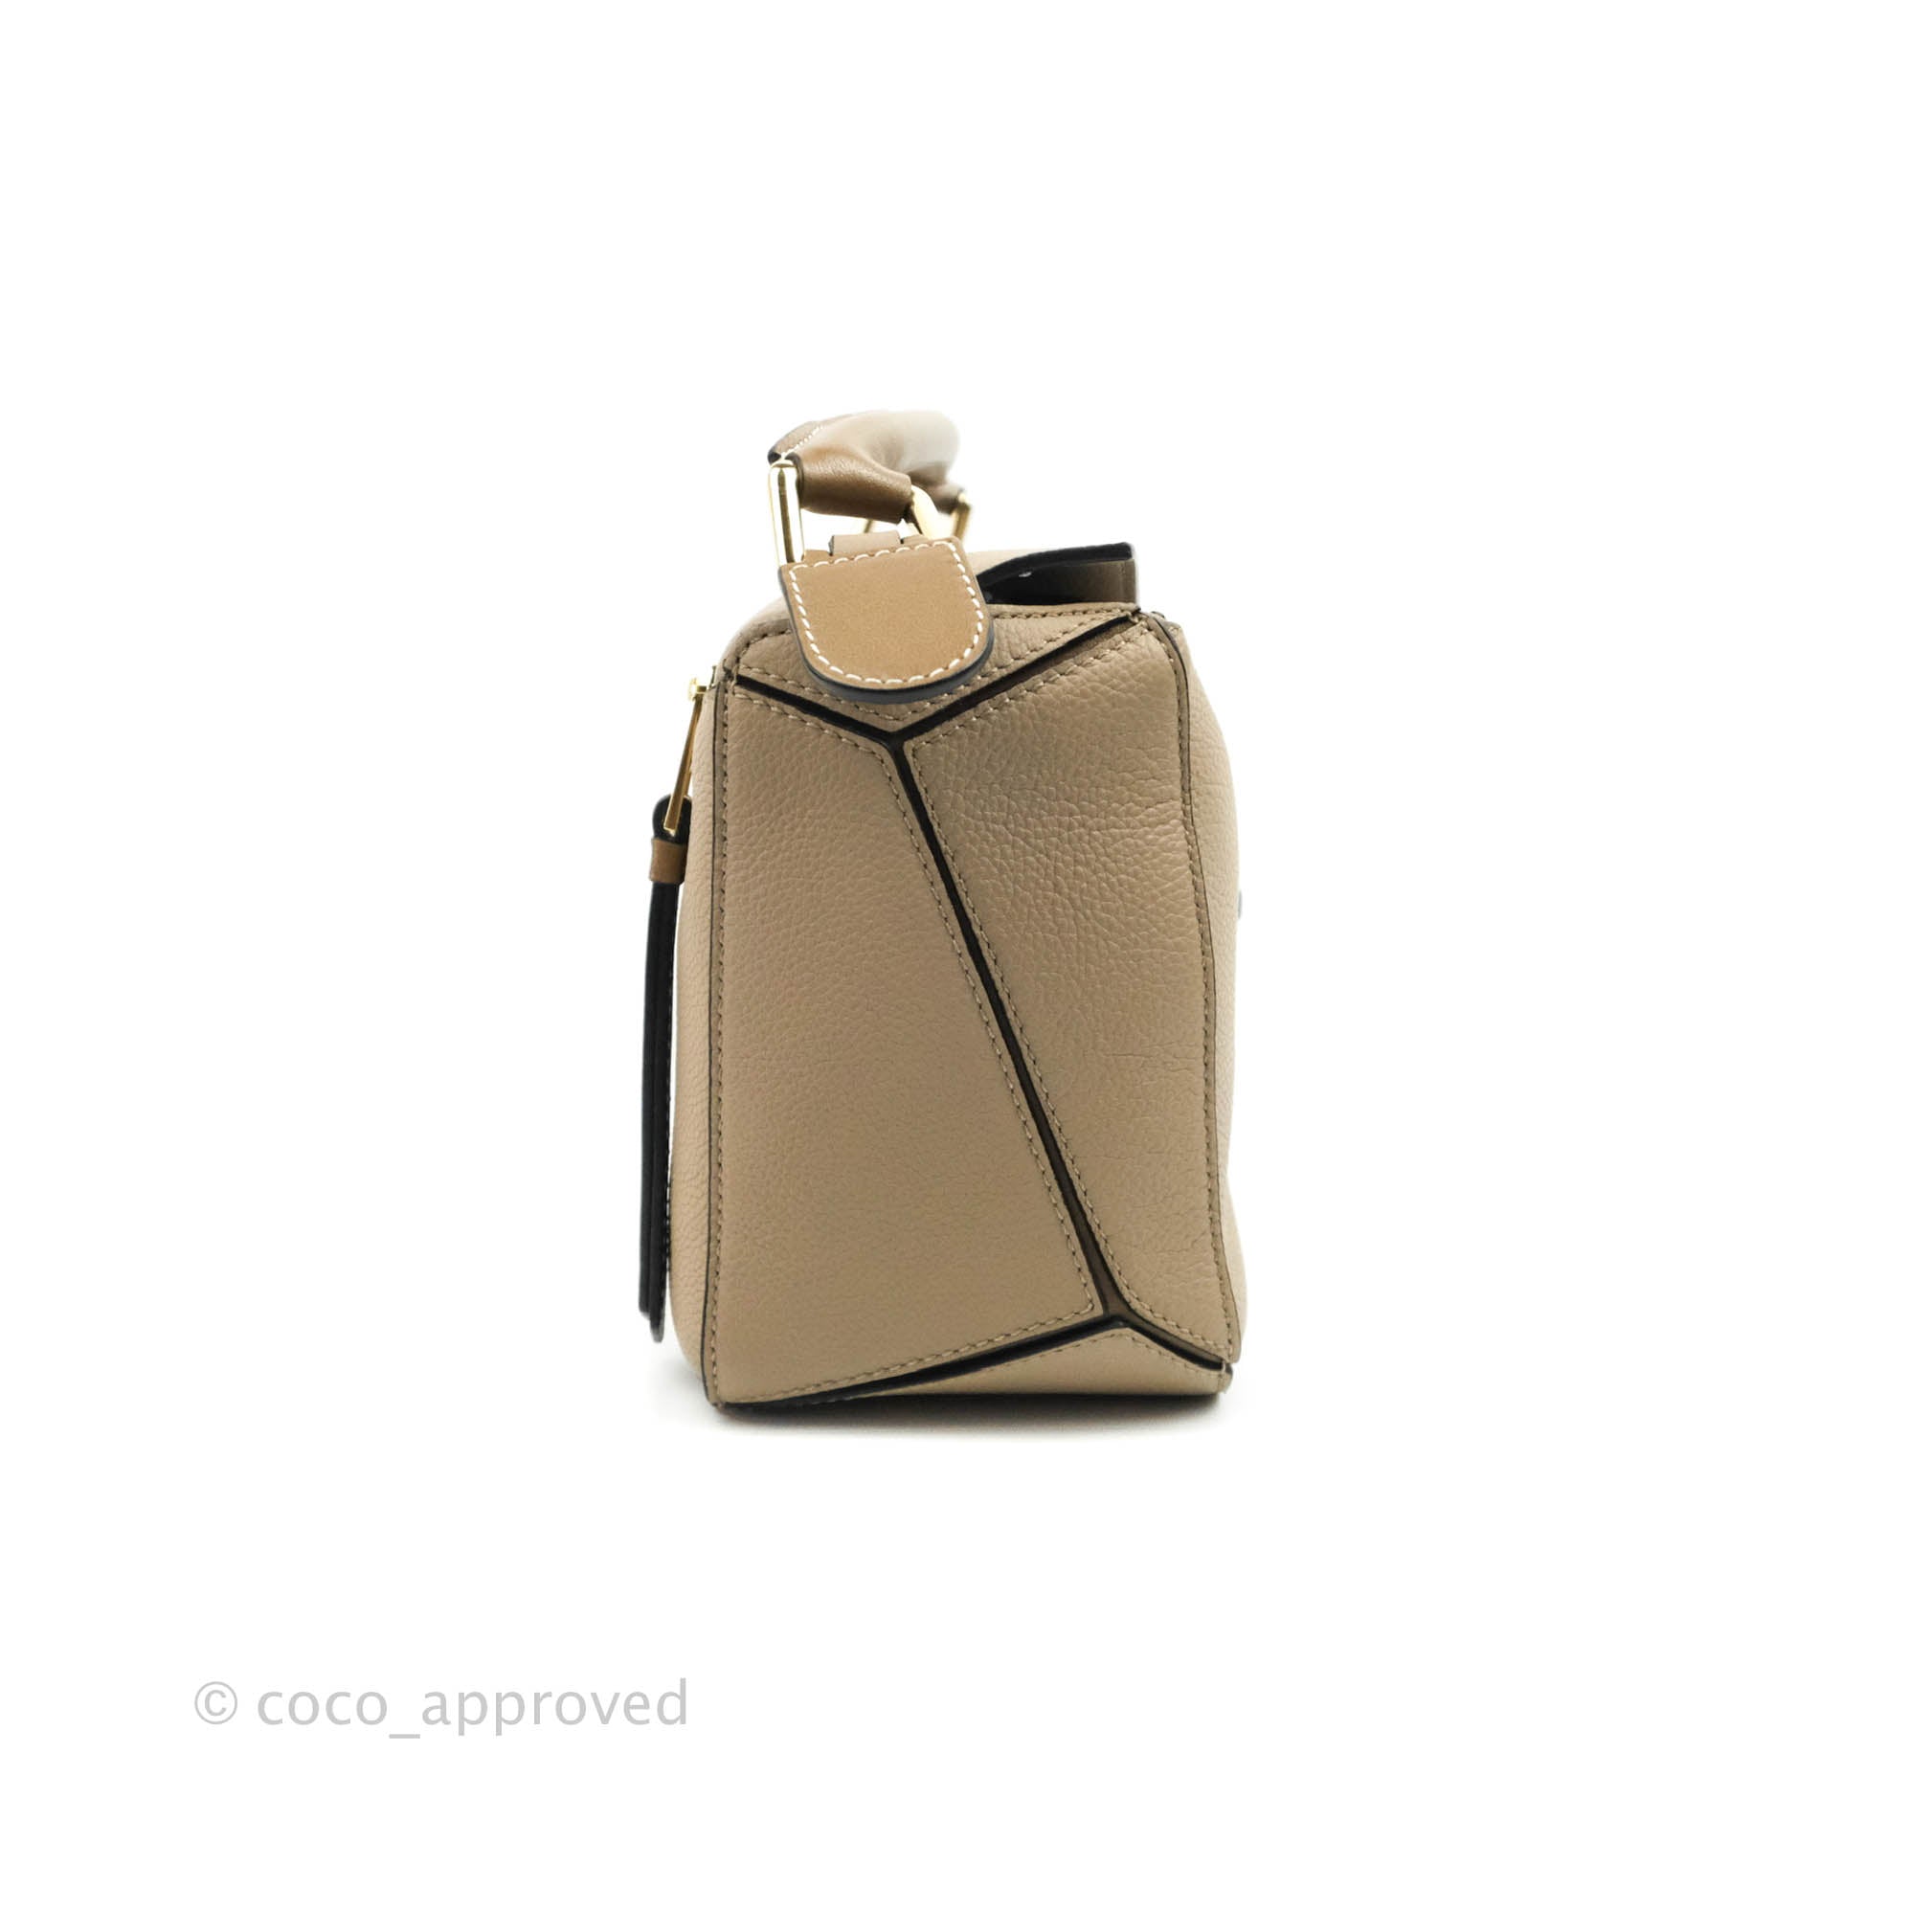 Small Puzzle bag in soft grained calfskin Sand - LOEWE